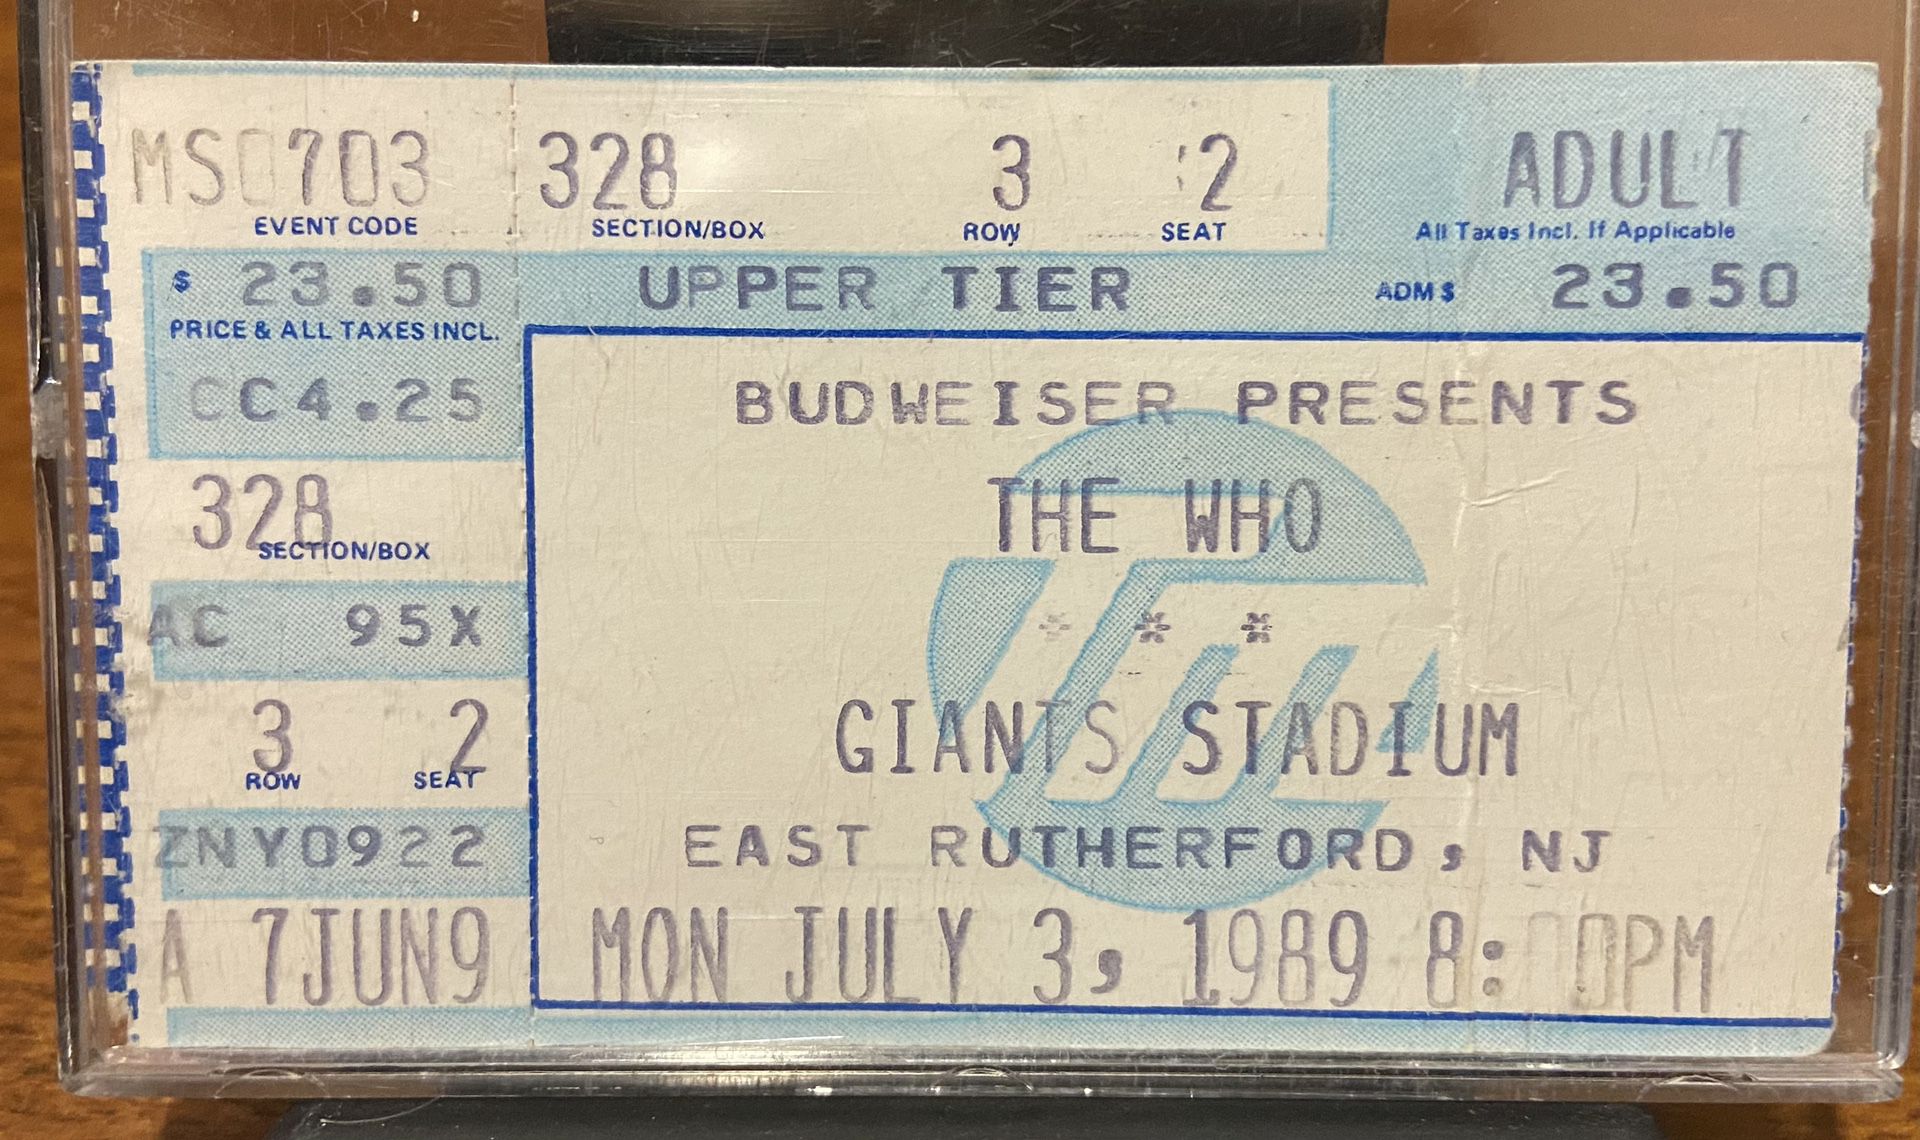 Ticket Stubs & 2 Trading Cards